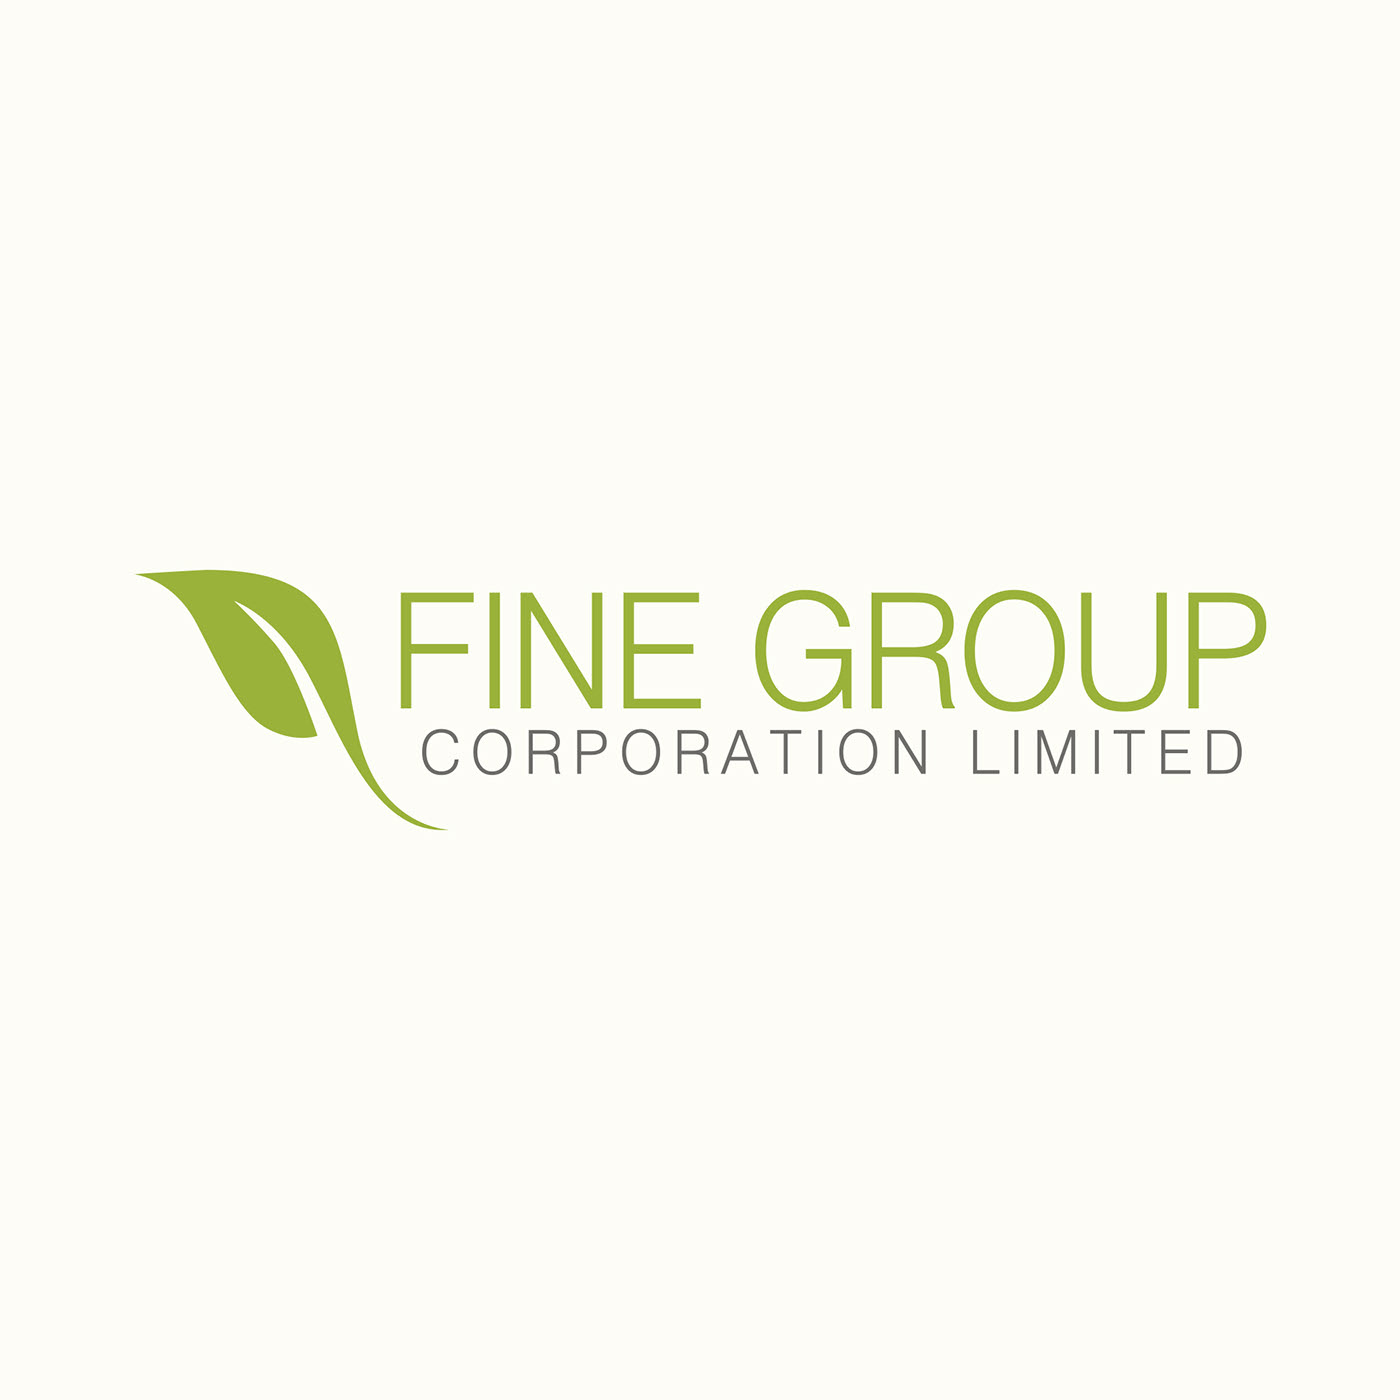 Fine Group Corporation Limited